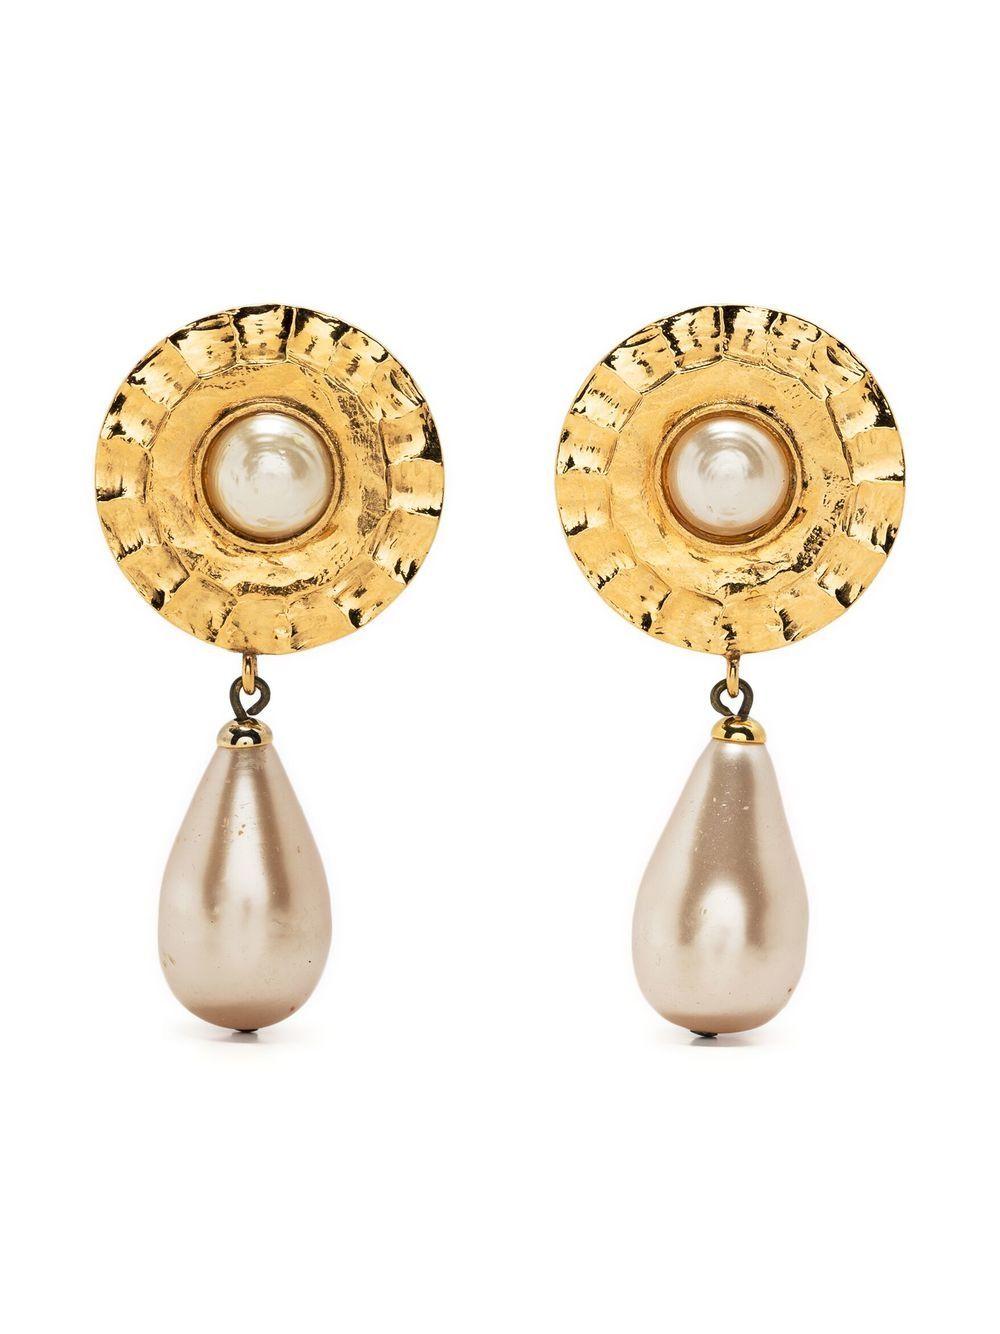 1980s Chanel long gold-tone clip-on earrings featuring a round shape with a faux-pearl bead, a long faux-pearl drop, a clip-on fastening, back plaque pitted. 
Circa 1980s
These earrings come as a pair.
Length: 2.3in. (6cm)
In good vintage condition.